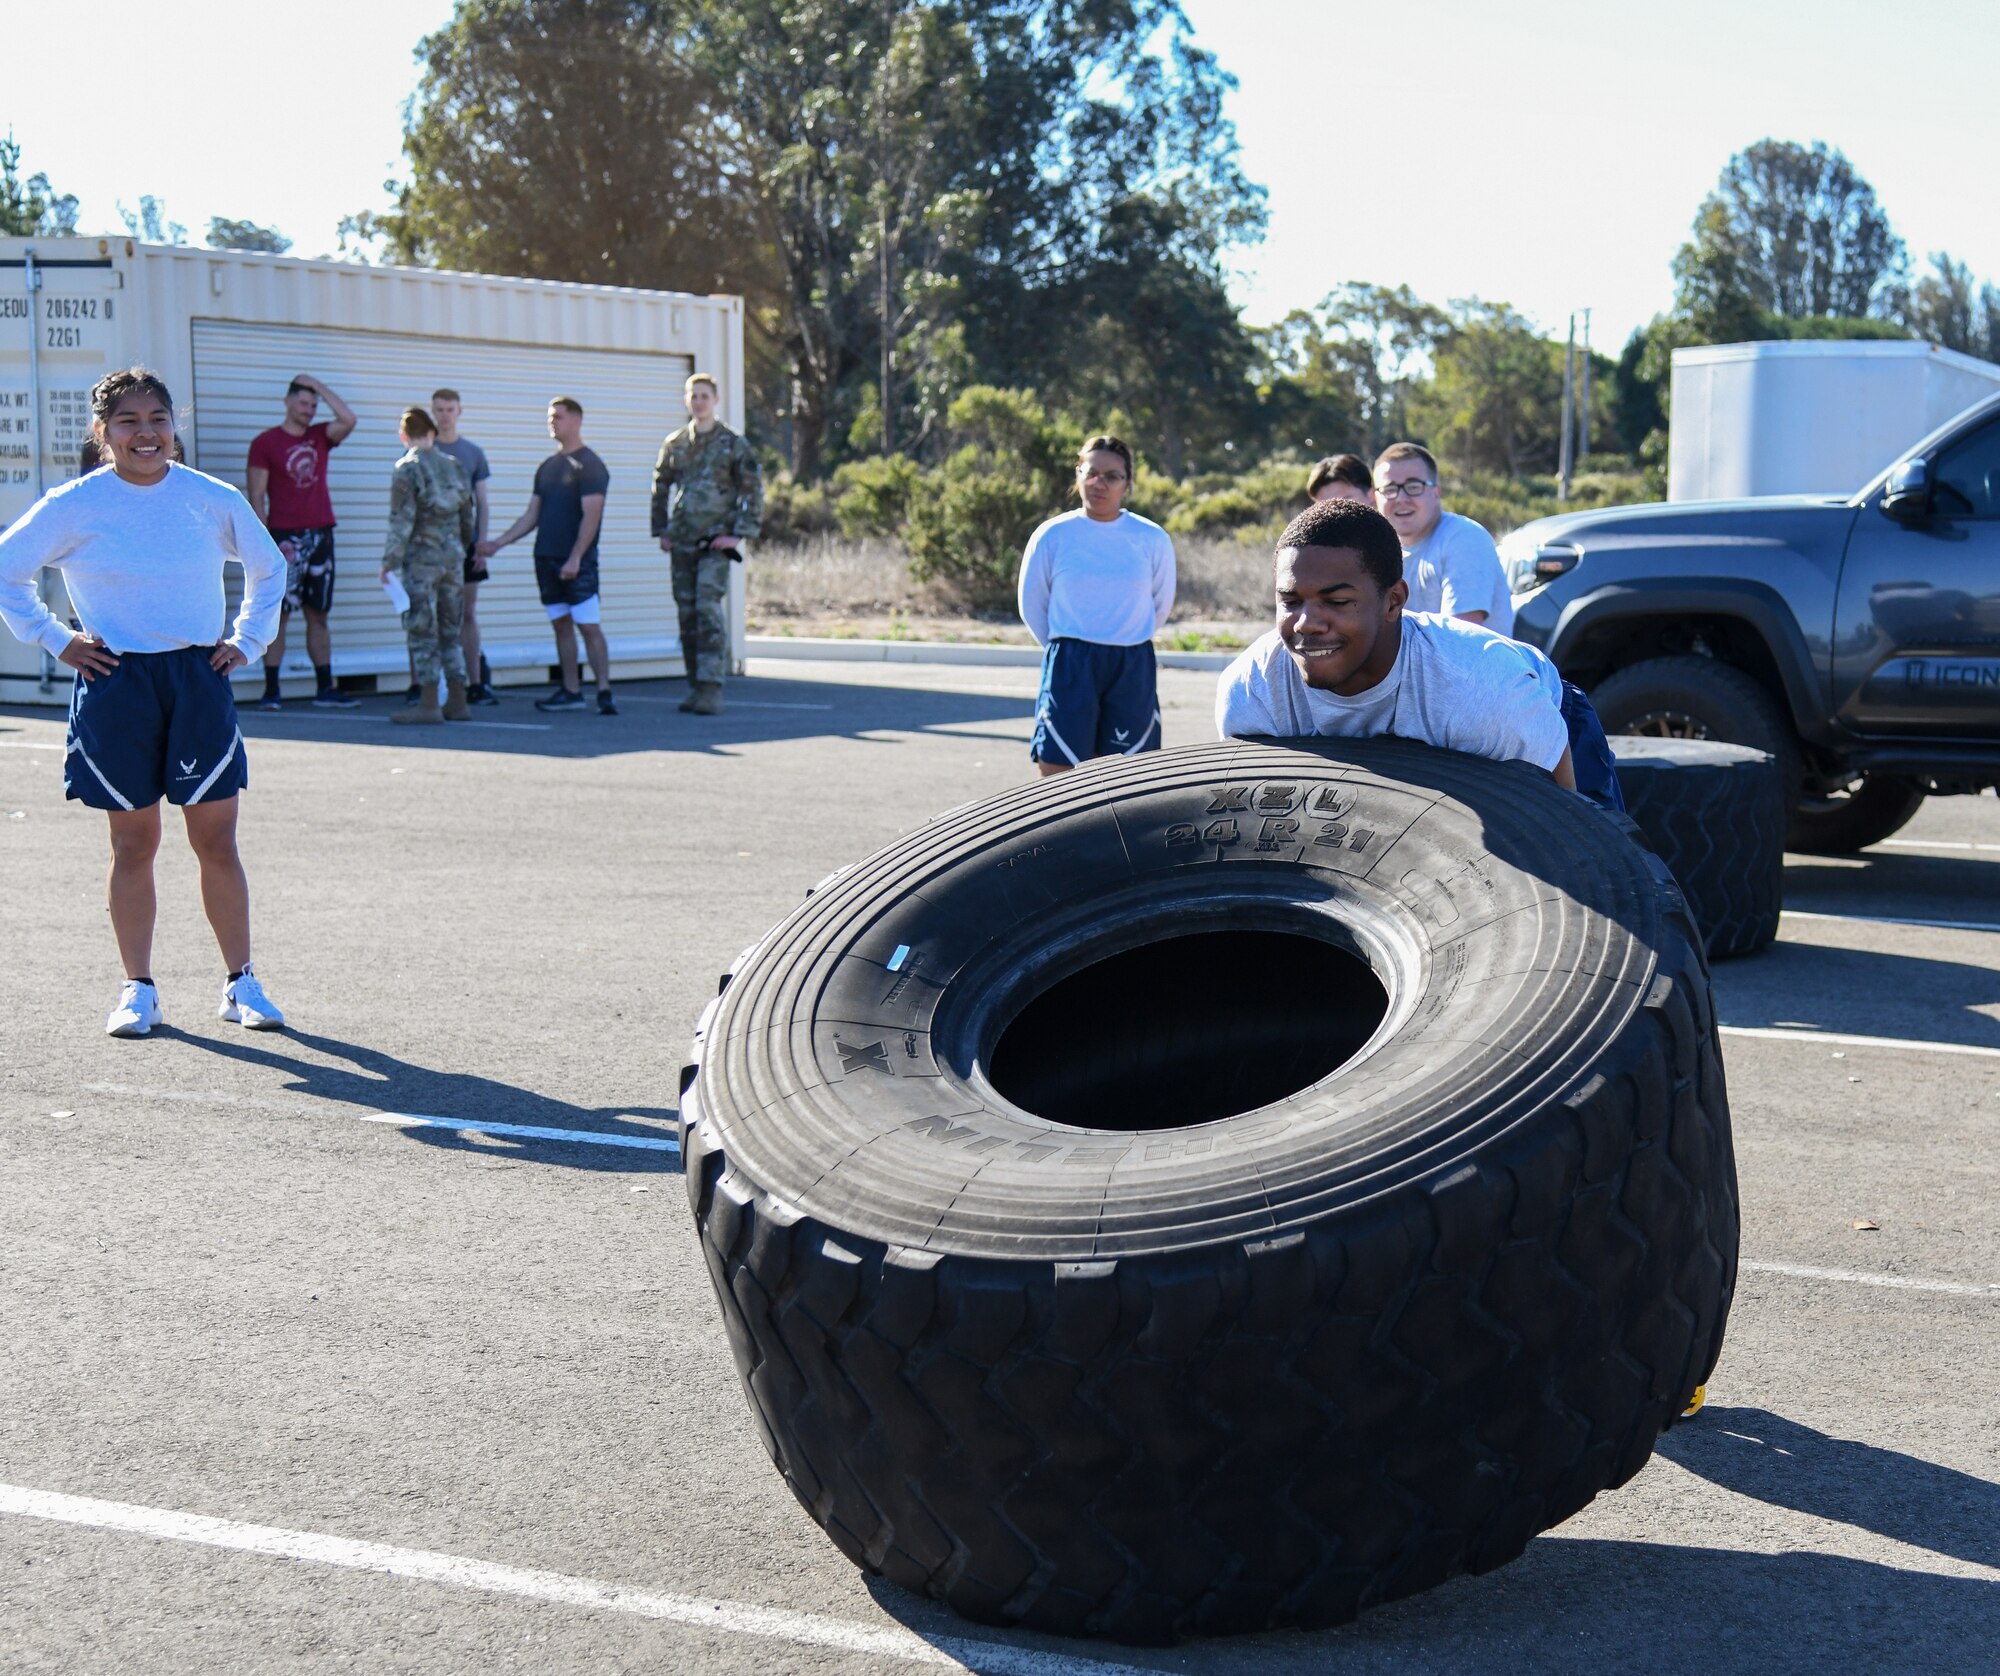 Space Launch Delta 30 Airmen and Guardians compete in the tire flip event to demonstrate physical strength and endurance at the West Coast Warriors First Responders Appreciation Week on Oct. 15, 2021 to at Vandenberg Space Force Base, Calif. (U.S. Space Force photo by Airman 1st Class Rocio Romo)